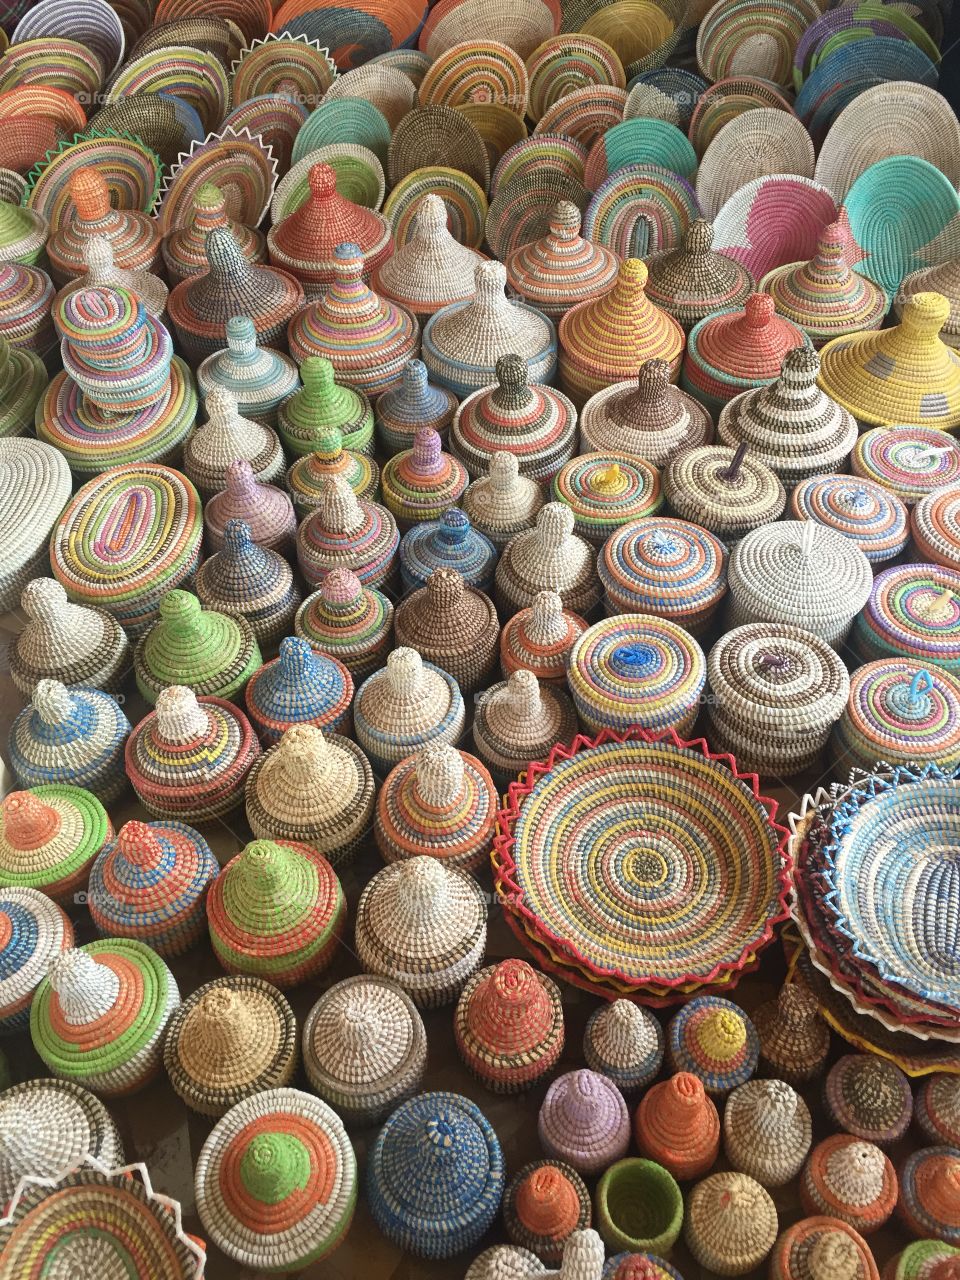 Basket shopping in Senegal. It's impossible to choose!